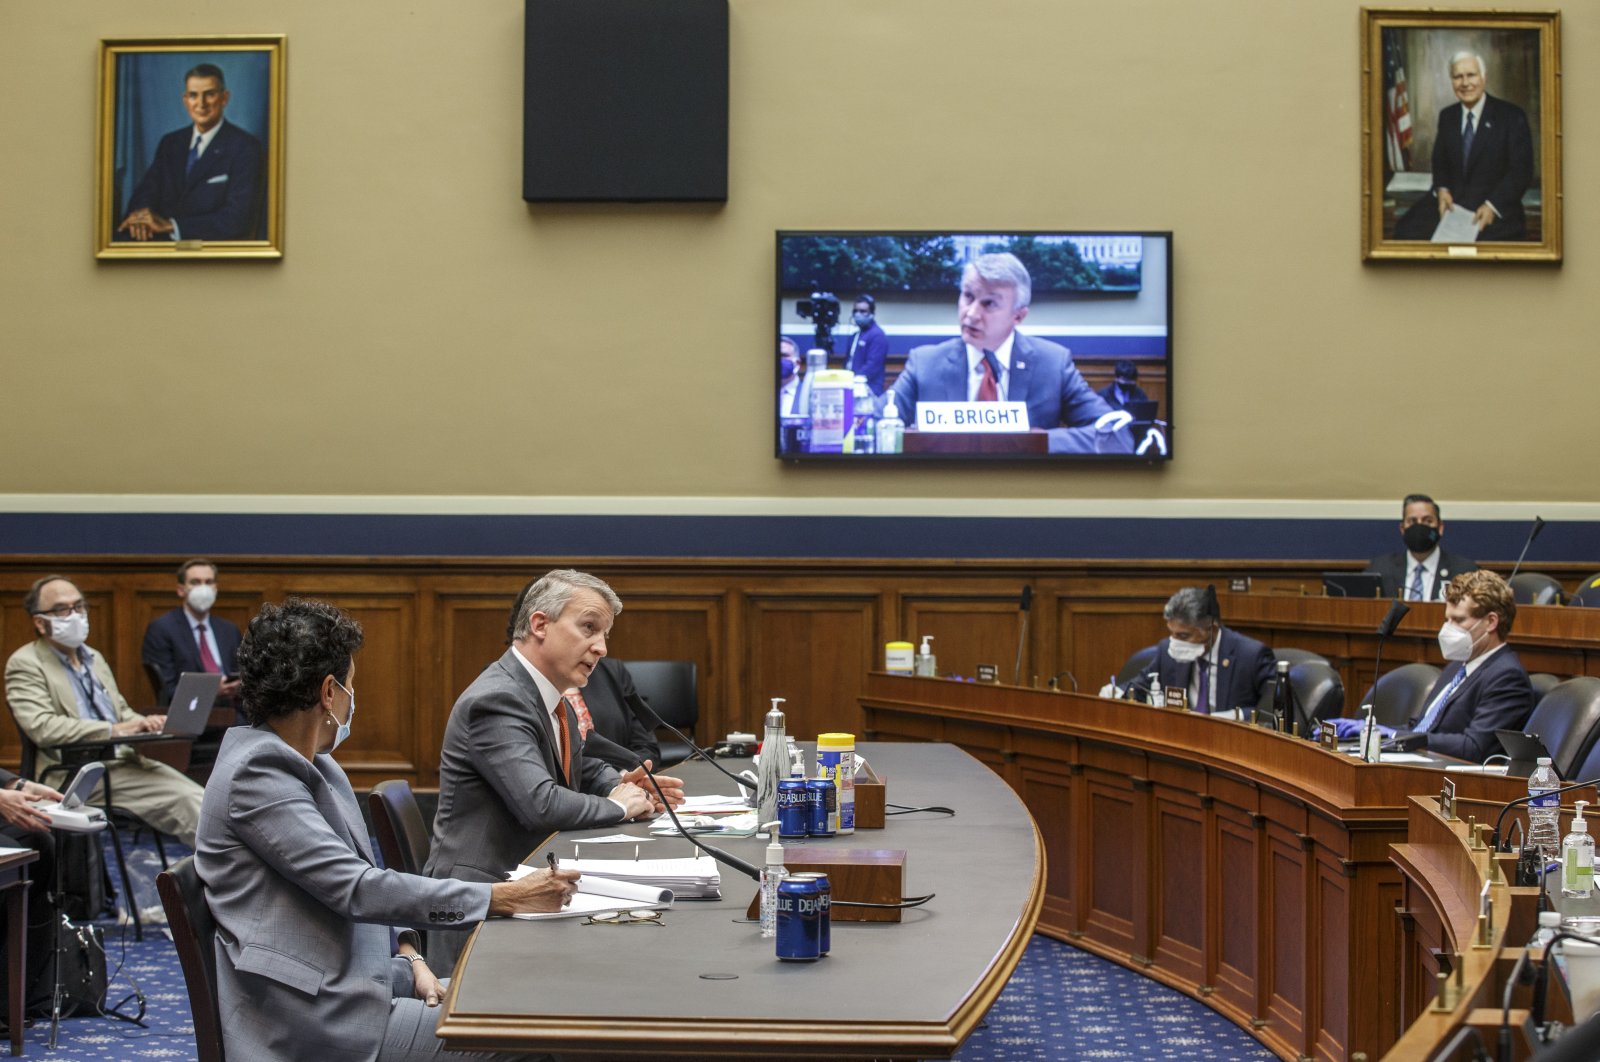 Dr. Richard Bright, former director of the Biomedical Advanced Research and Development Authority, testifies before a House Energy and Commerce Subcommittee on Health hearing to discuss protecting scientific integrity in response to the coronavirus outbreak on Capitol Hill, Washington, D.C., May 14, 2020. (AP Photo)